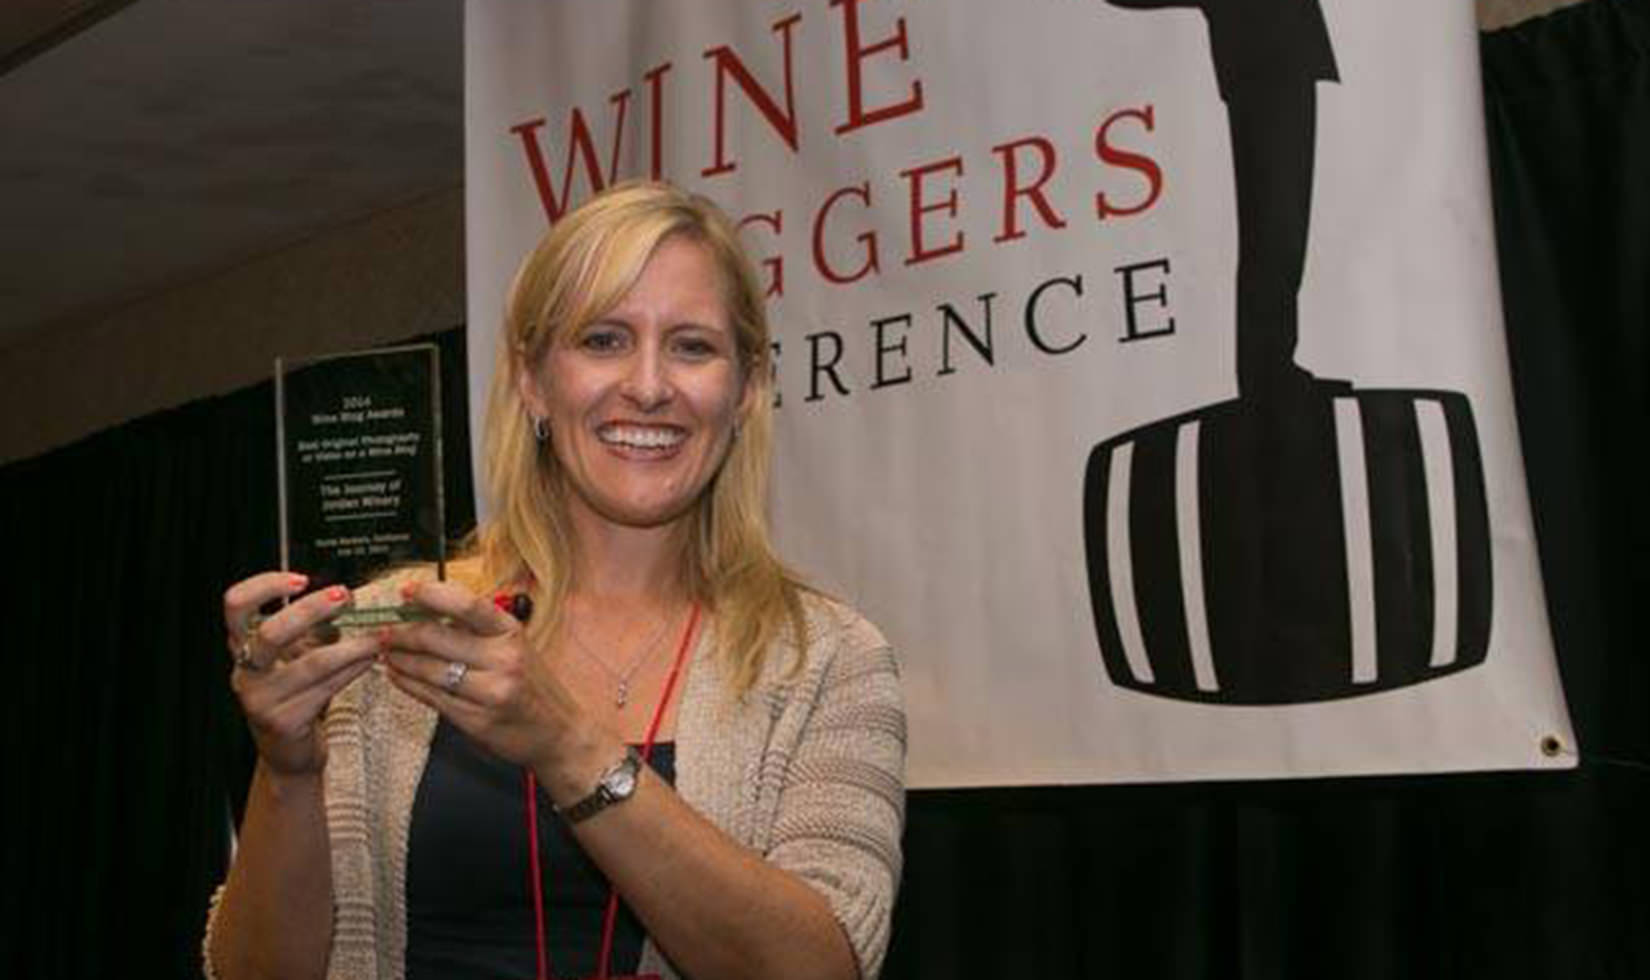 Lisa Mattson, Director of Marketing and Communications at Jordan Winery accepting an award for best photo and video on a wine blog at the 8th annual Wine Blog Awards